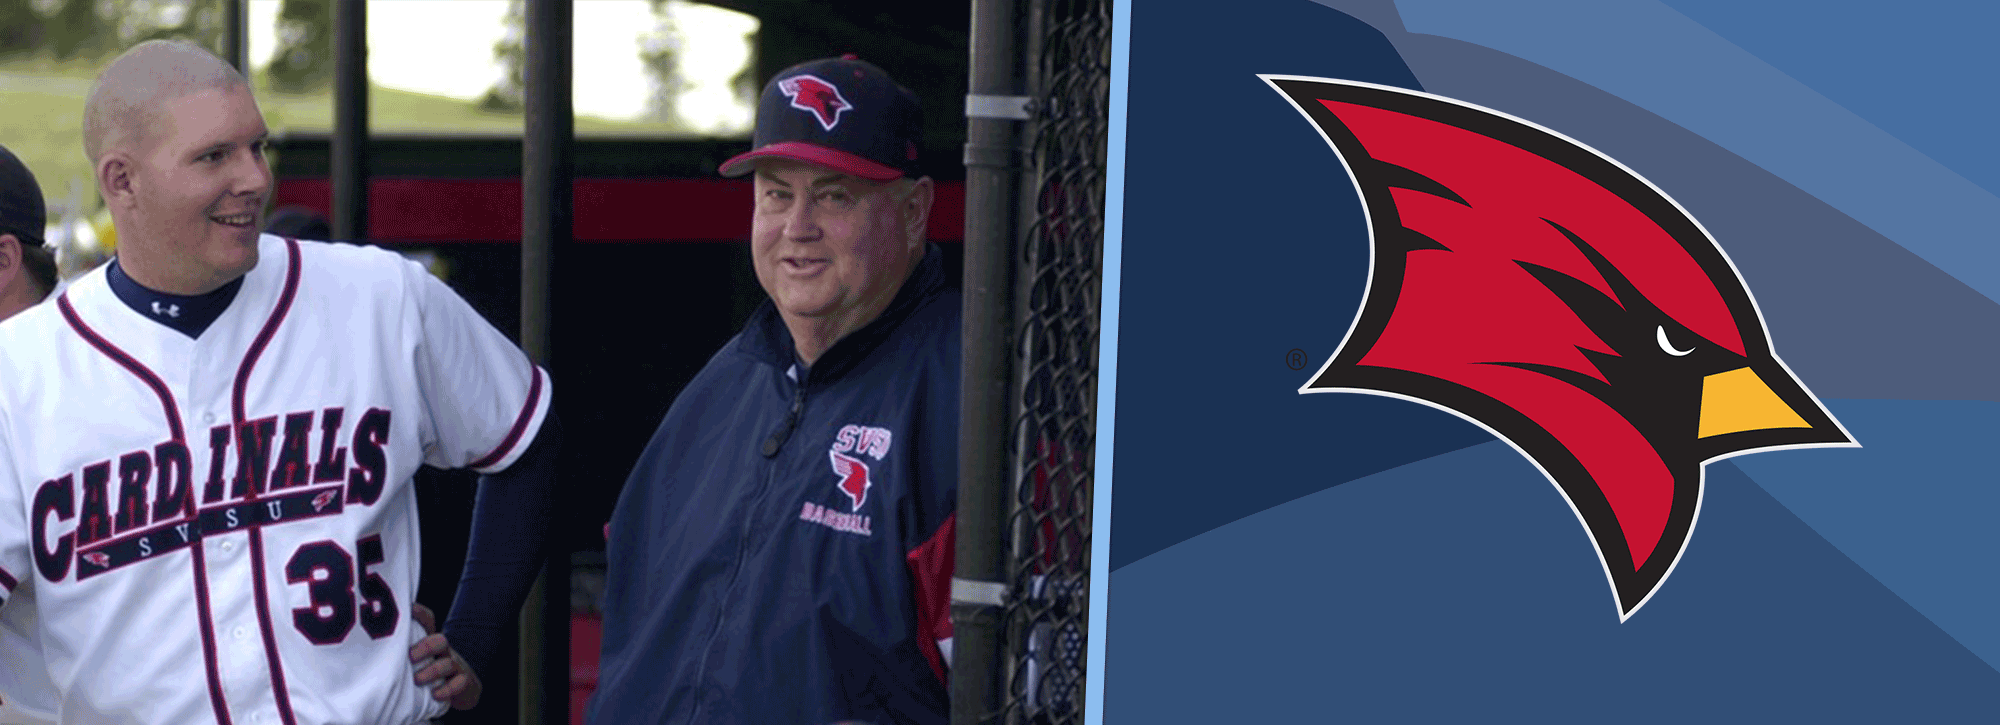 Former SVSU baseball coach leaves behind legacy of lives impacted among former players